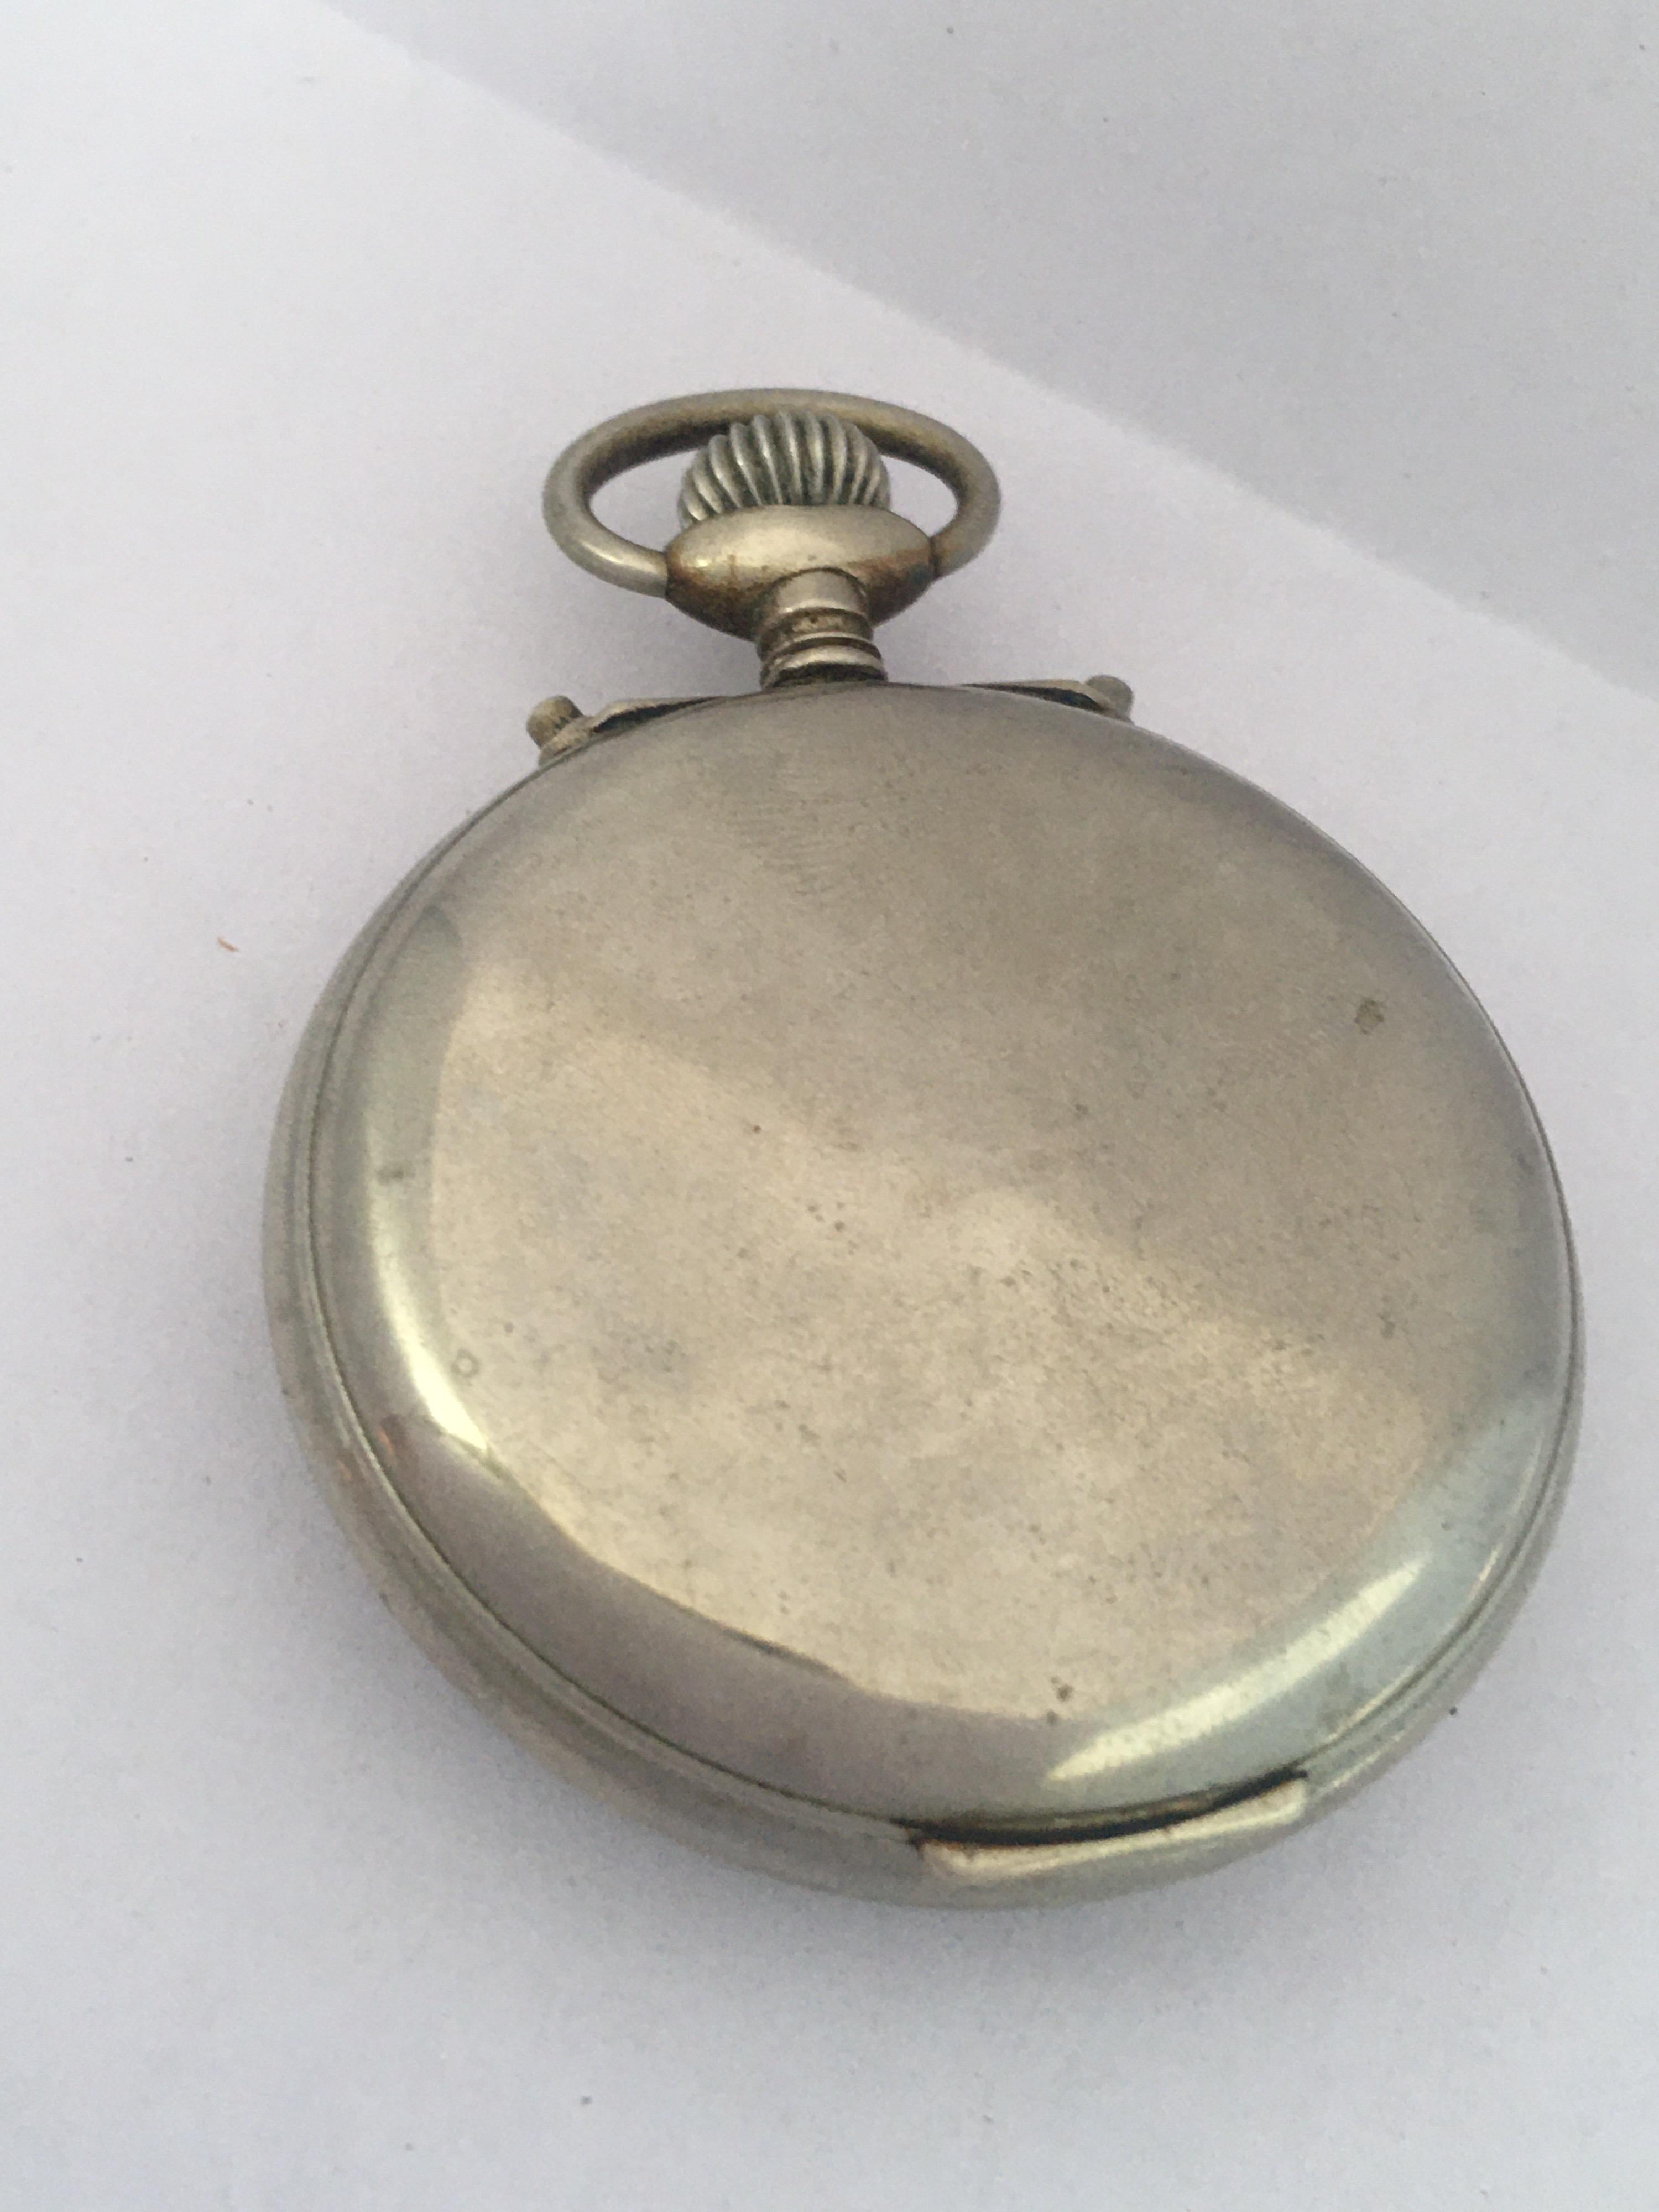 This beautiful antique 51mm diameter hand winding alarm pocket watch is in good working condition and it is running well. the alarm functioning well. Visible signs of ageing and wear with light surface marks on the on the  watch case. Tiny hairline